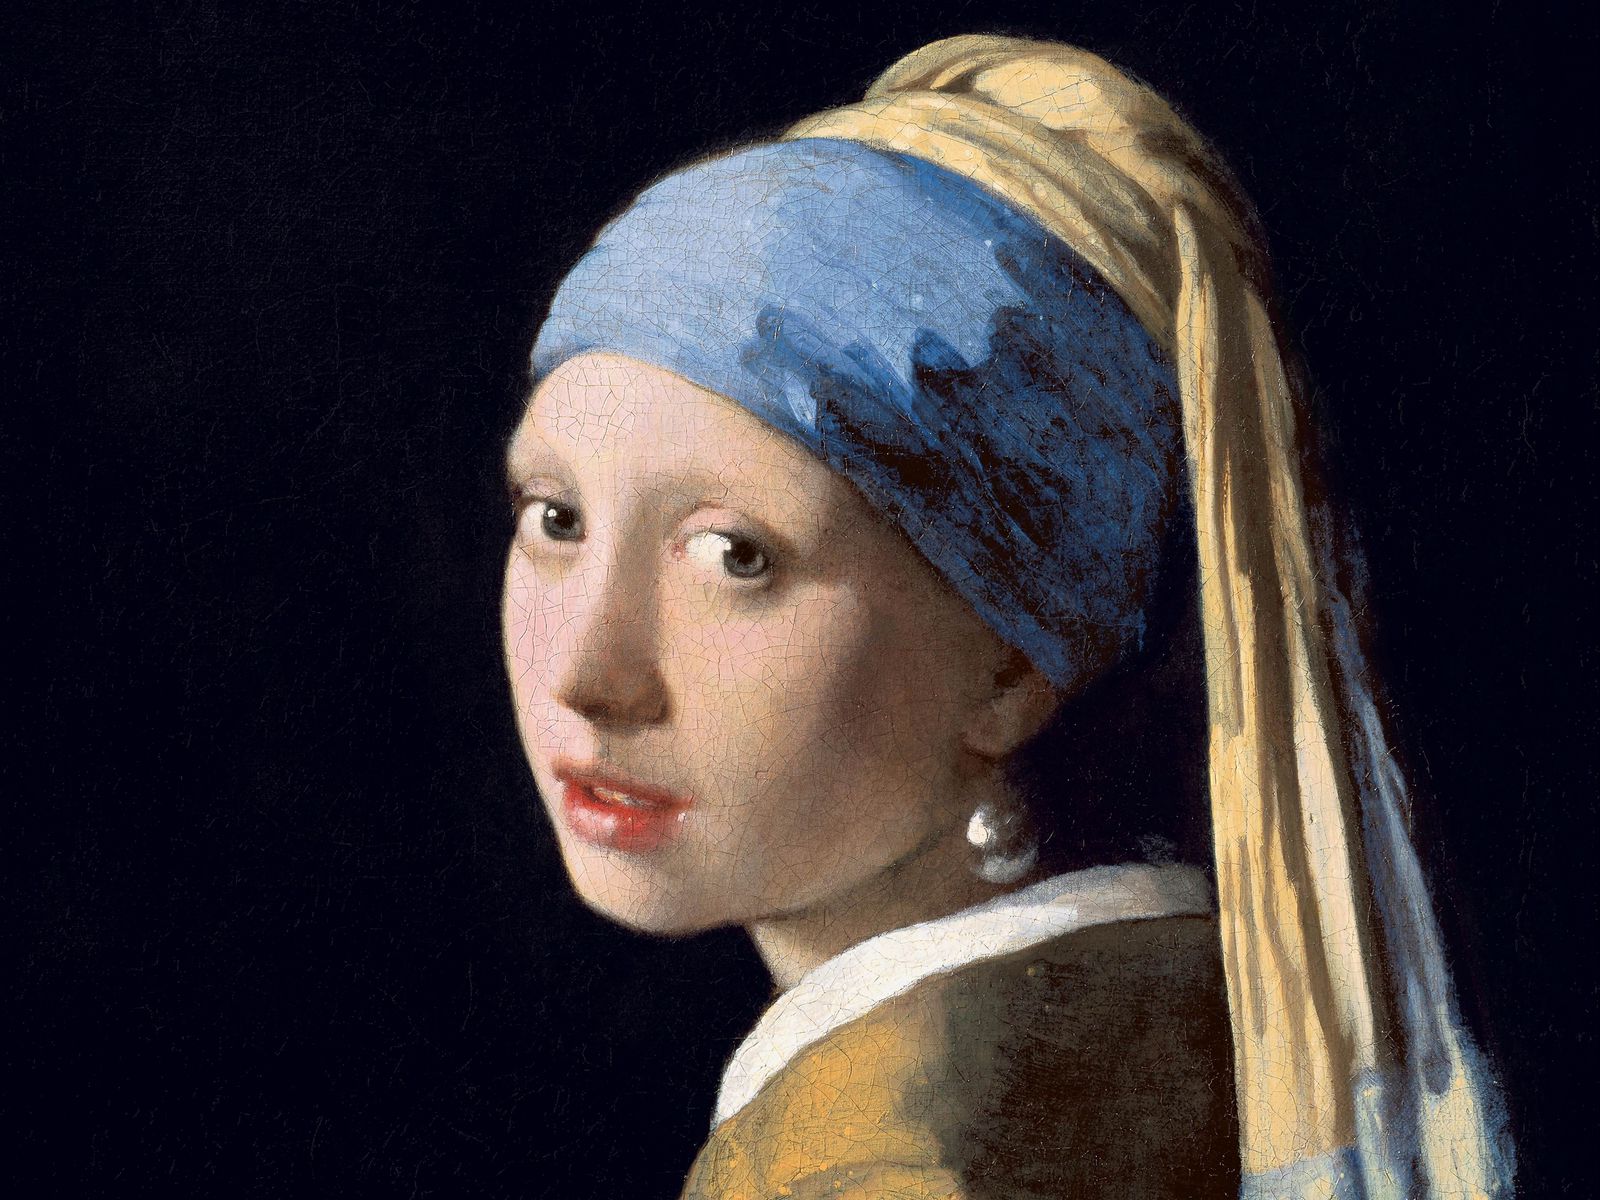 Download Wallpaper 1600x10 Johannes Vermeer Girl With A Pearl Earring Oil Canvas Art Standard 4 3 Hd Background